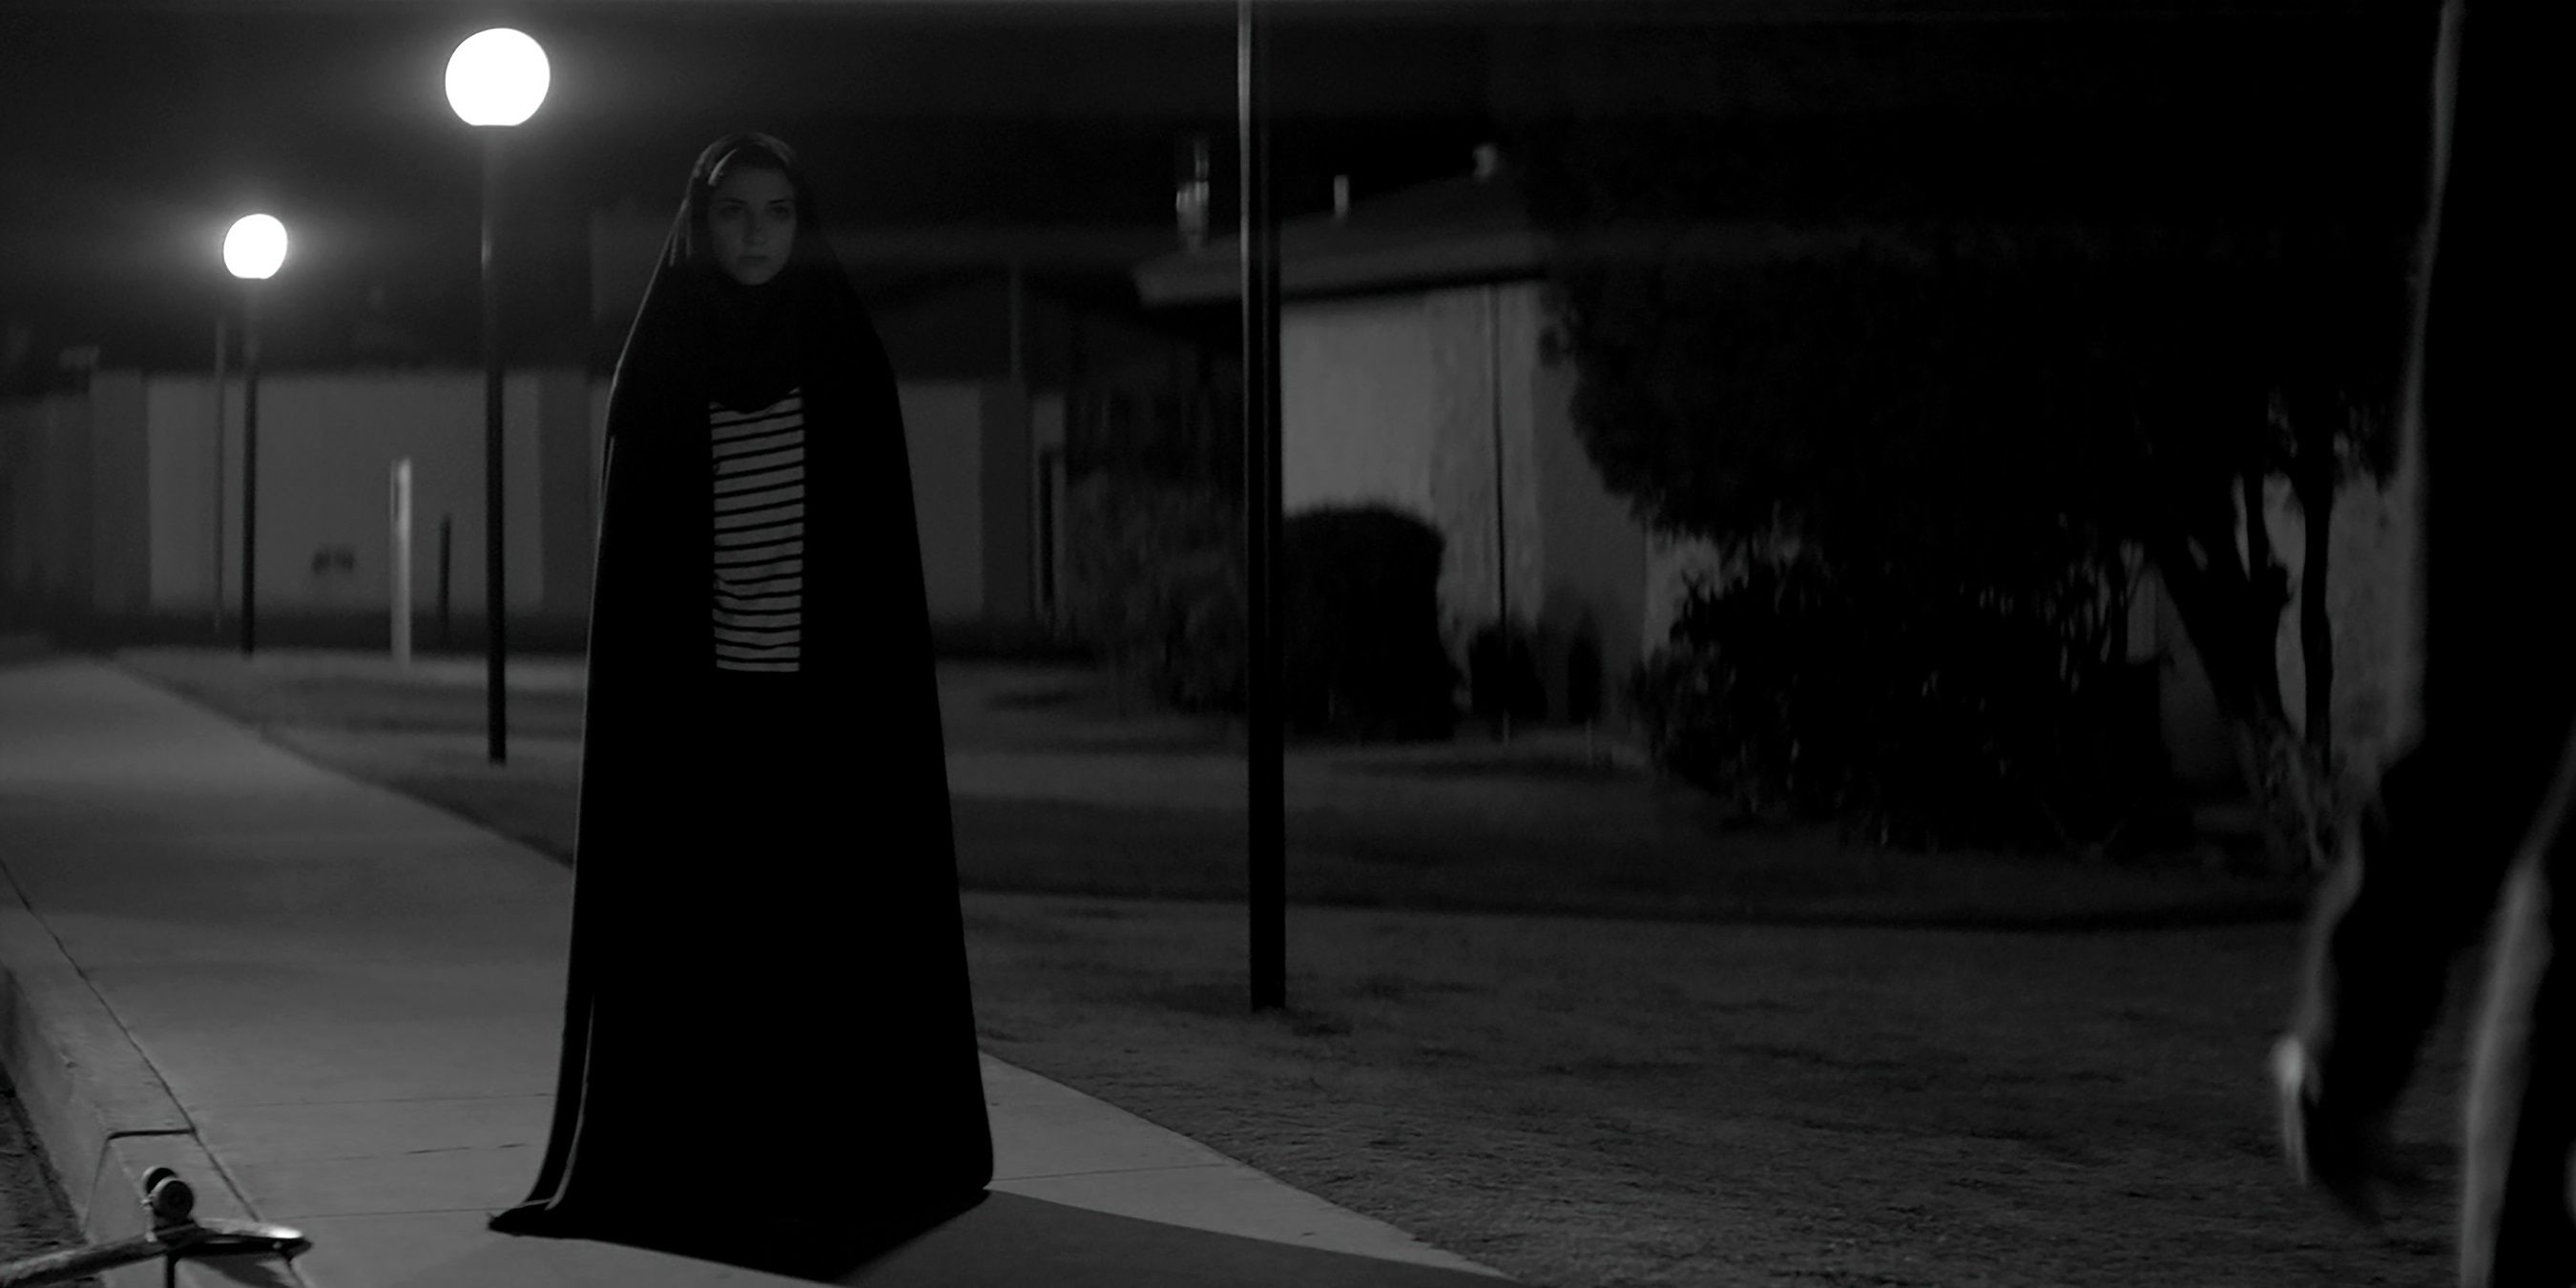 The Girl standing on the street in A Girl Walks Home Alone at Night